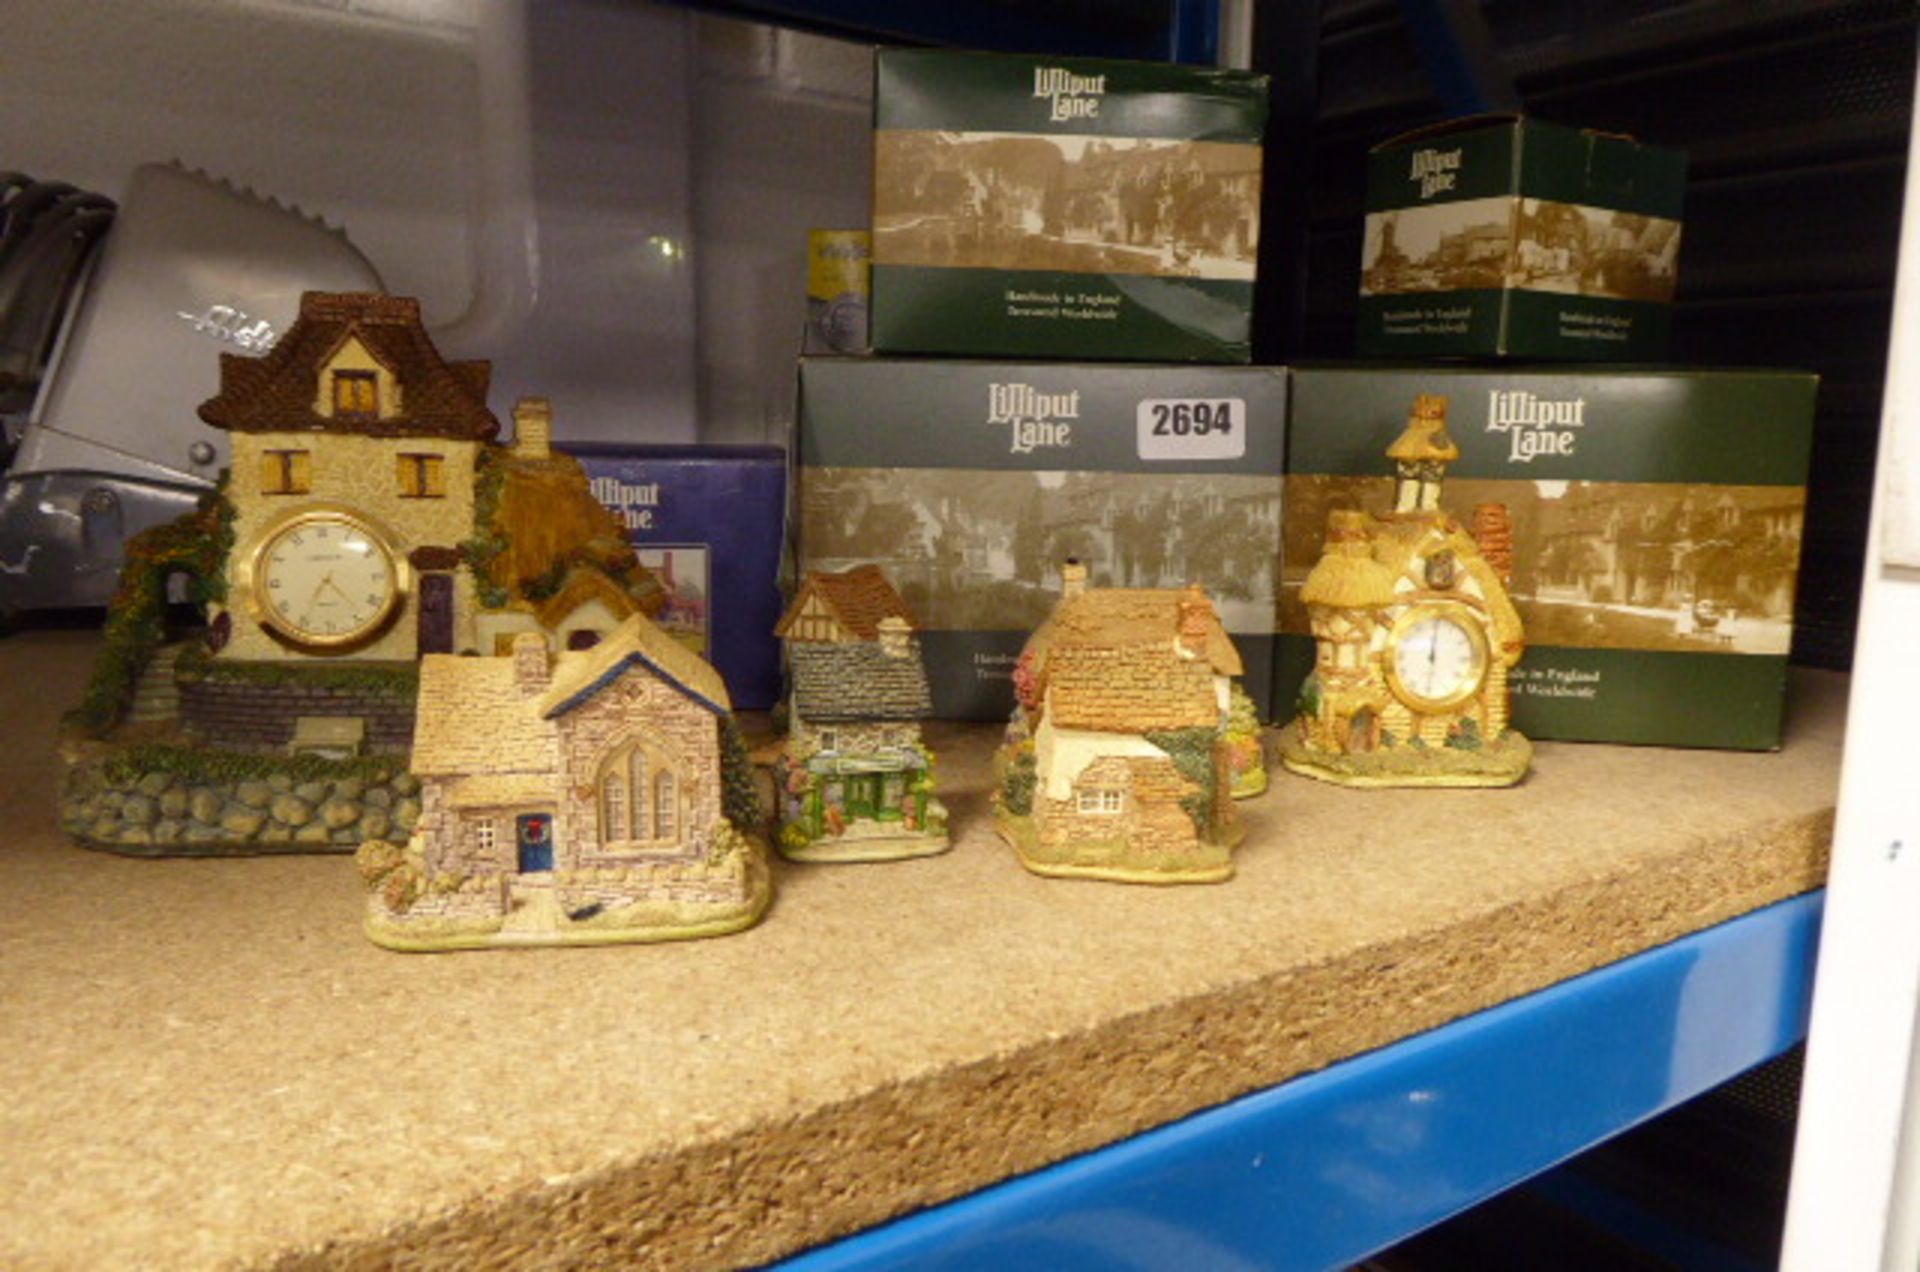 Selection of Lilliput Lane models inc. 1 with Lincoln clock